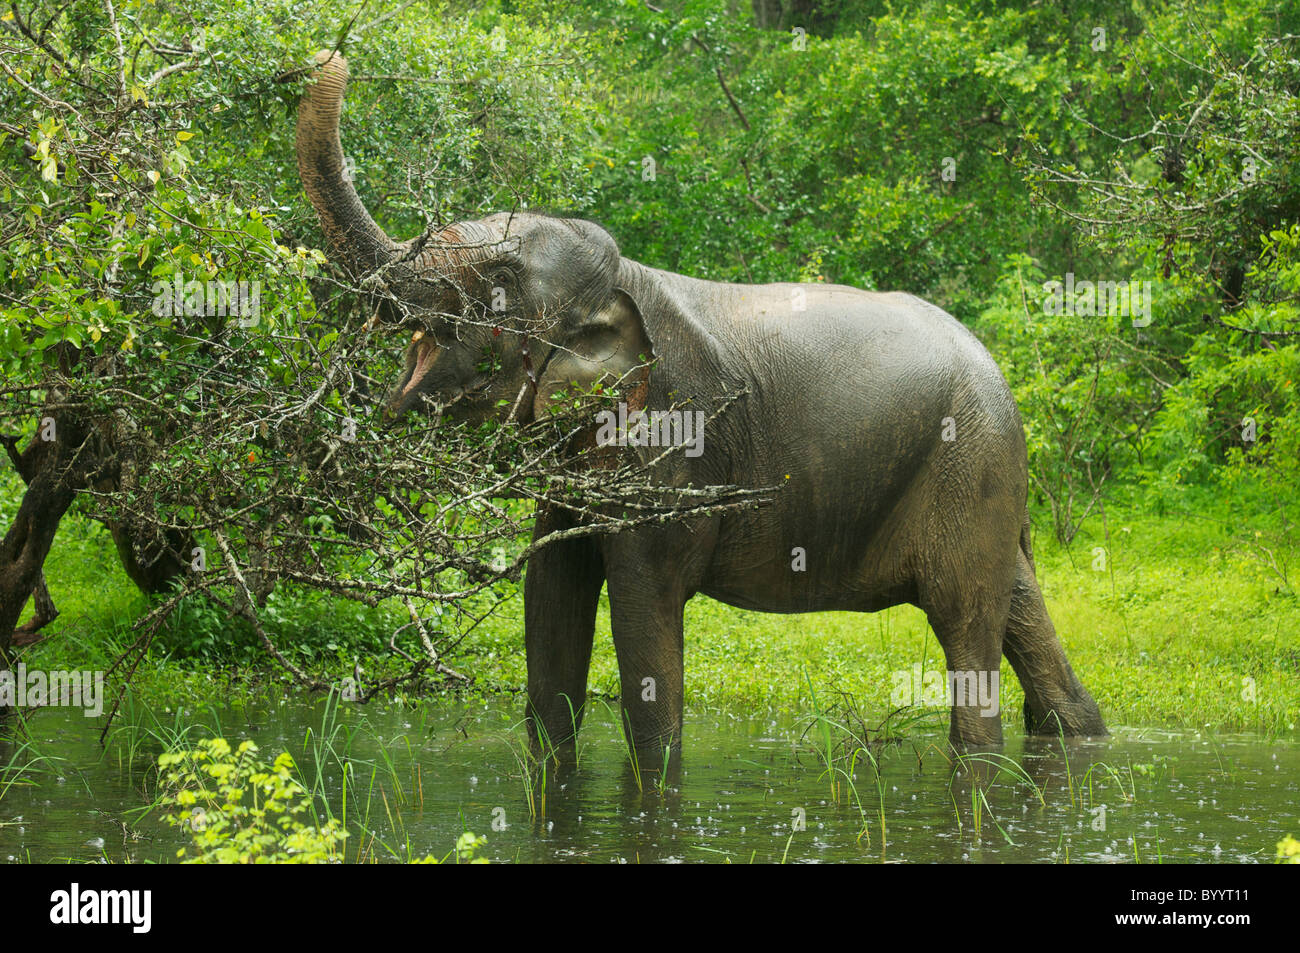 An Asian elephant looking for food in the forest Yala National Park Sri Lanka Stock Photo